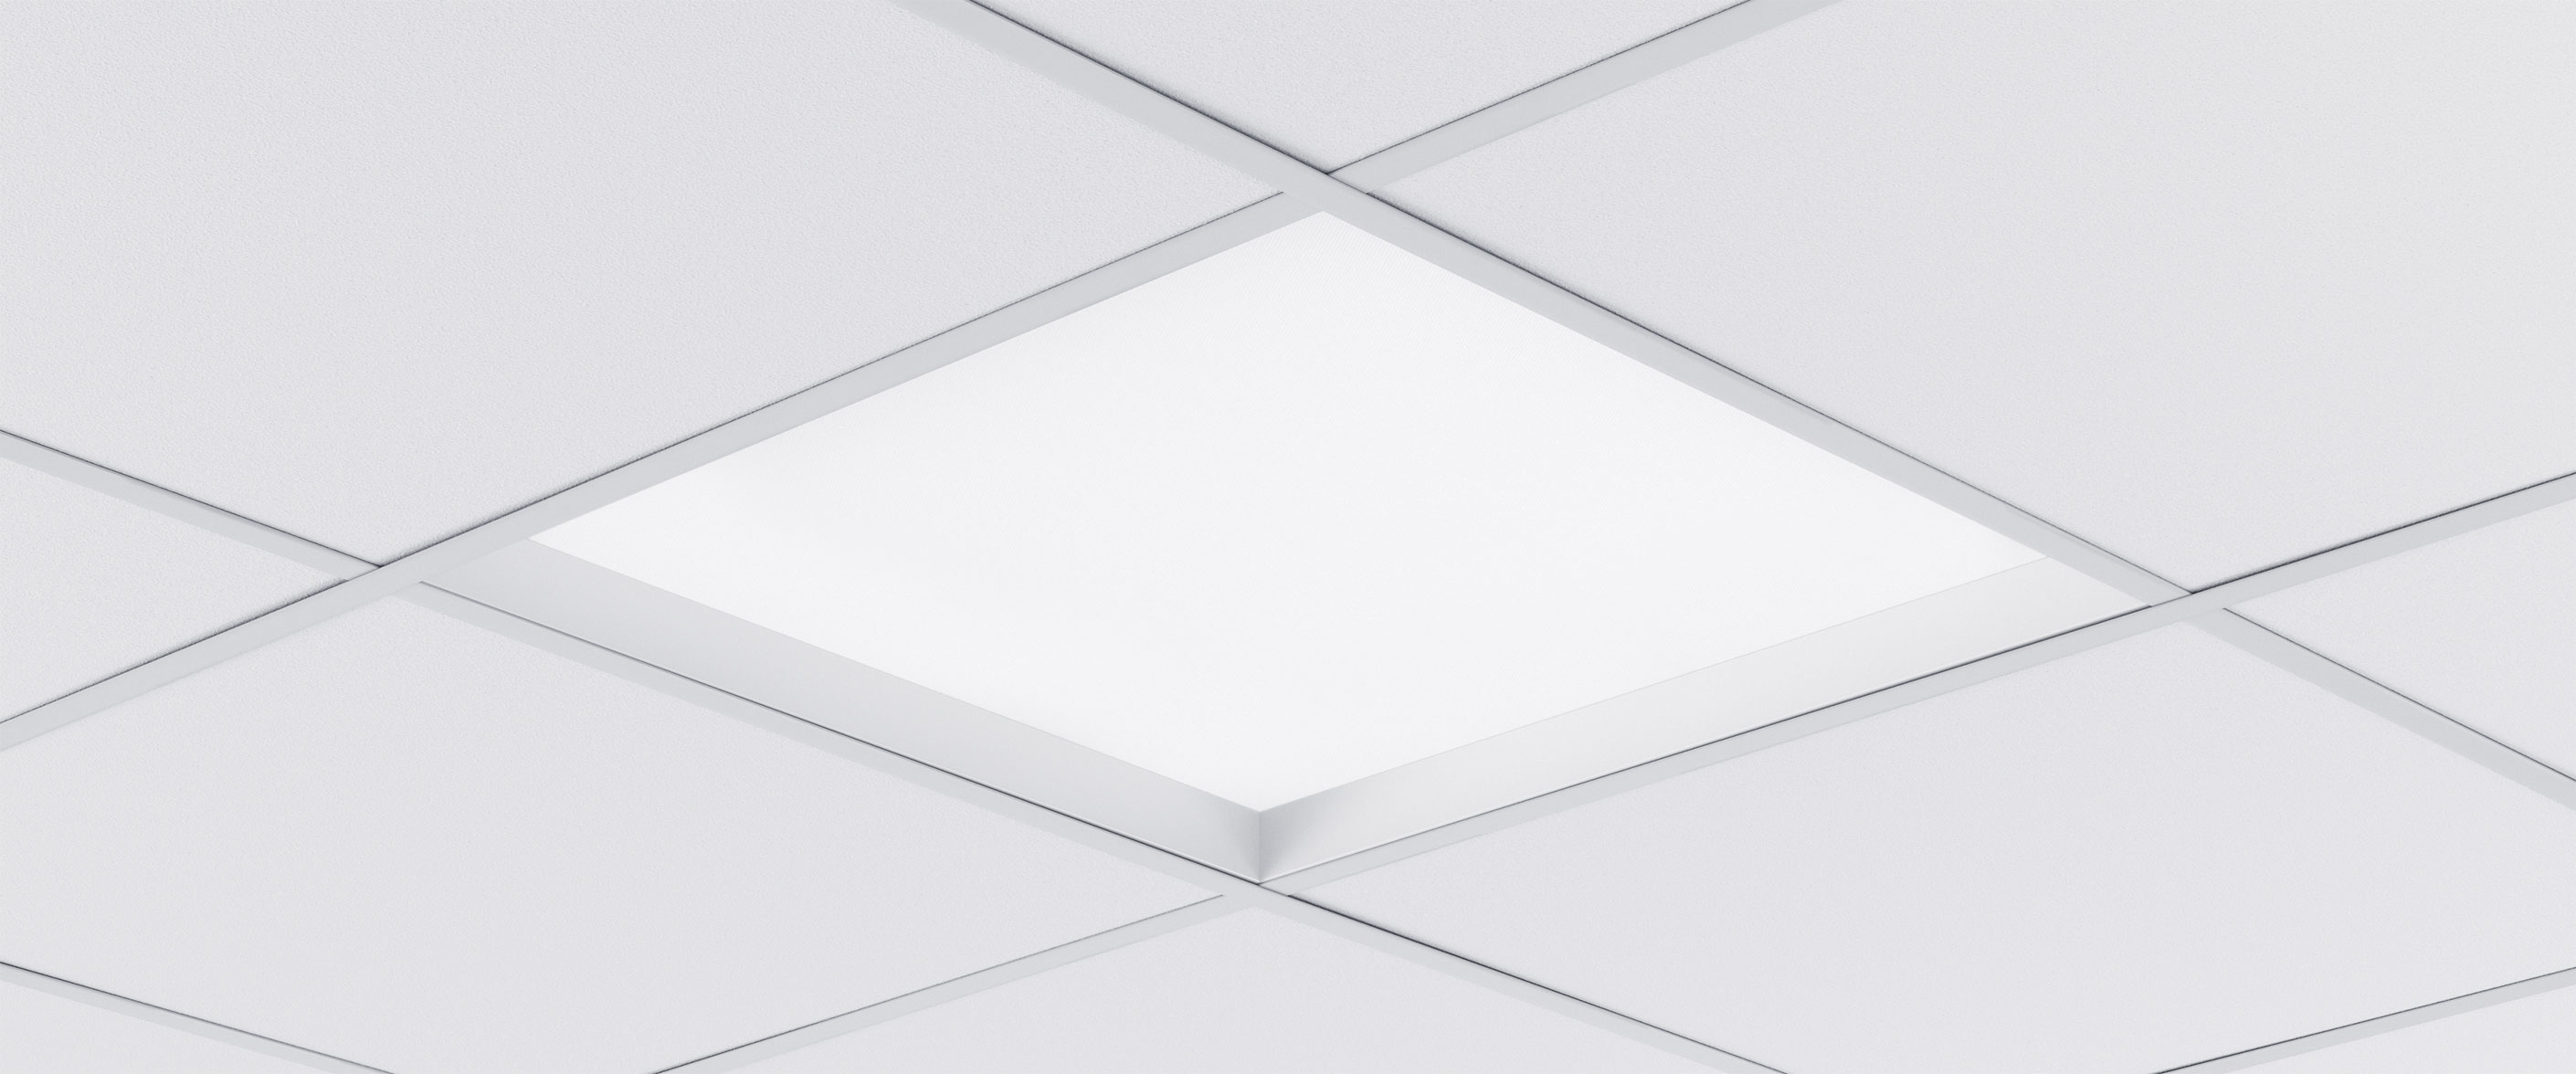 Sky Frame - decorative accessory for recessed 600x600 luminaires. See more versions under Accessories.